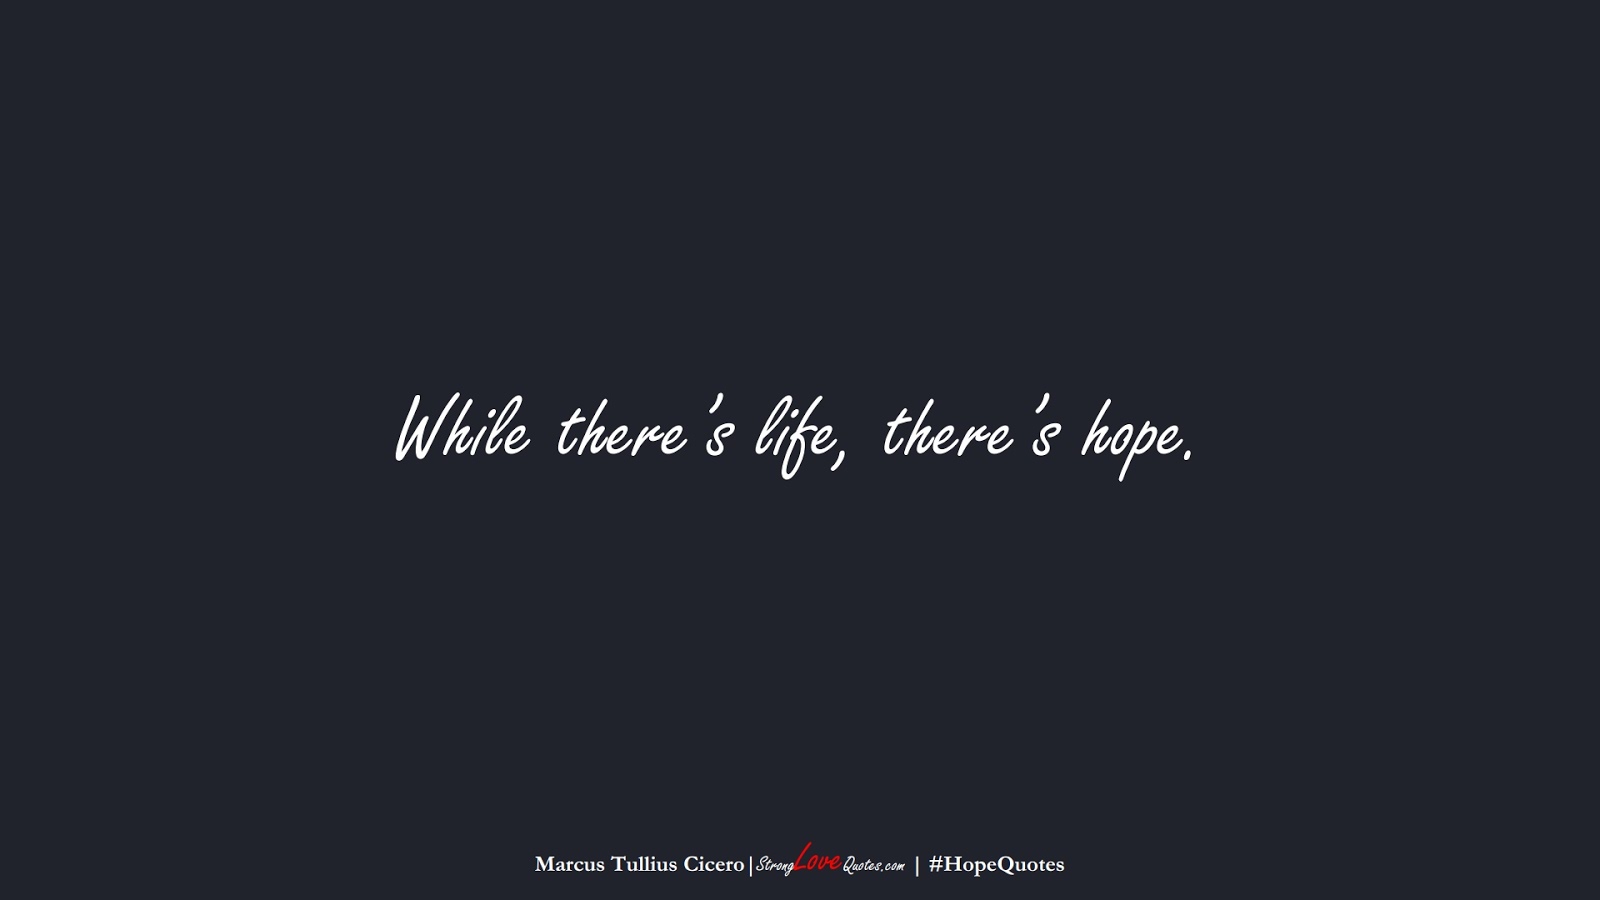 While there’s life, there’s hope. (Marcus Tullius Cicero);  #HopeQuotes